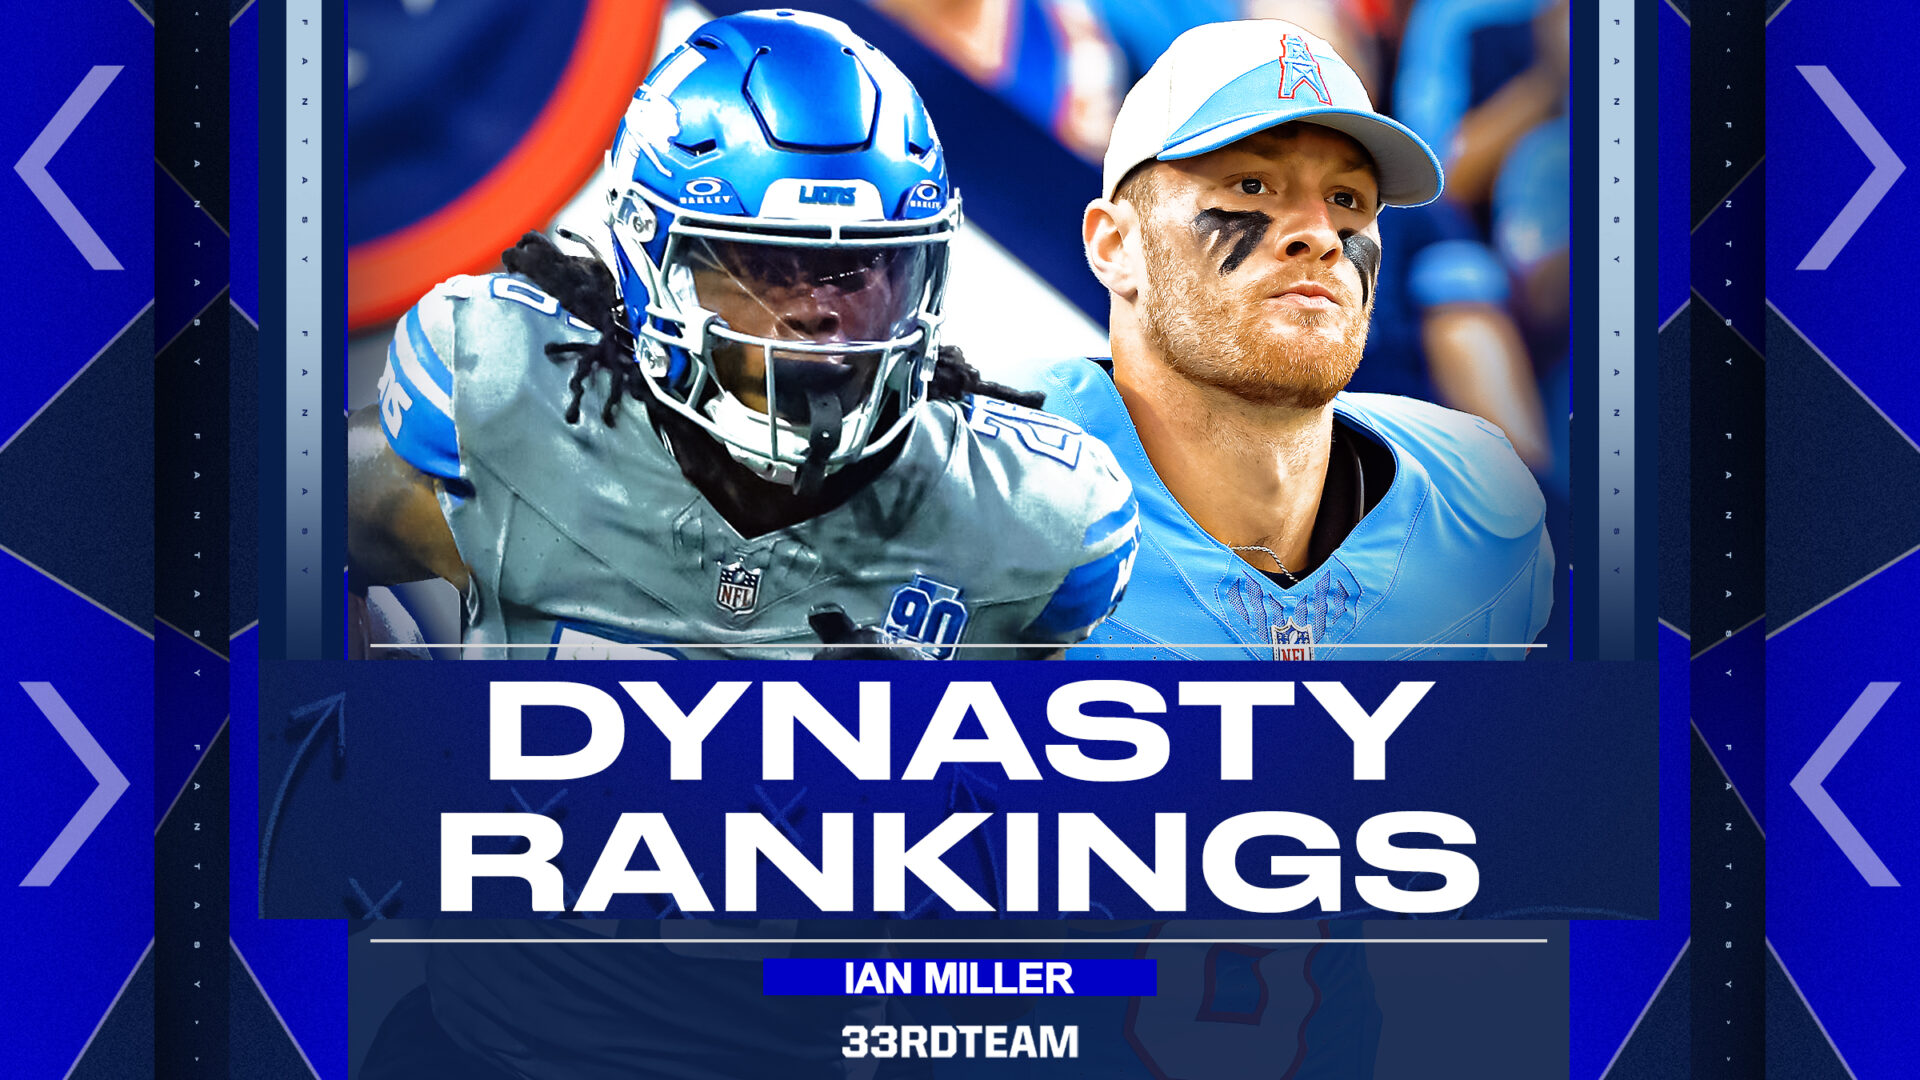 Images of Will Levis and Jahmyr Gibbs with text that reads "Dynasty Rankings"